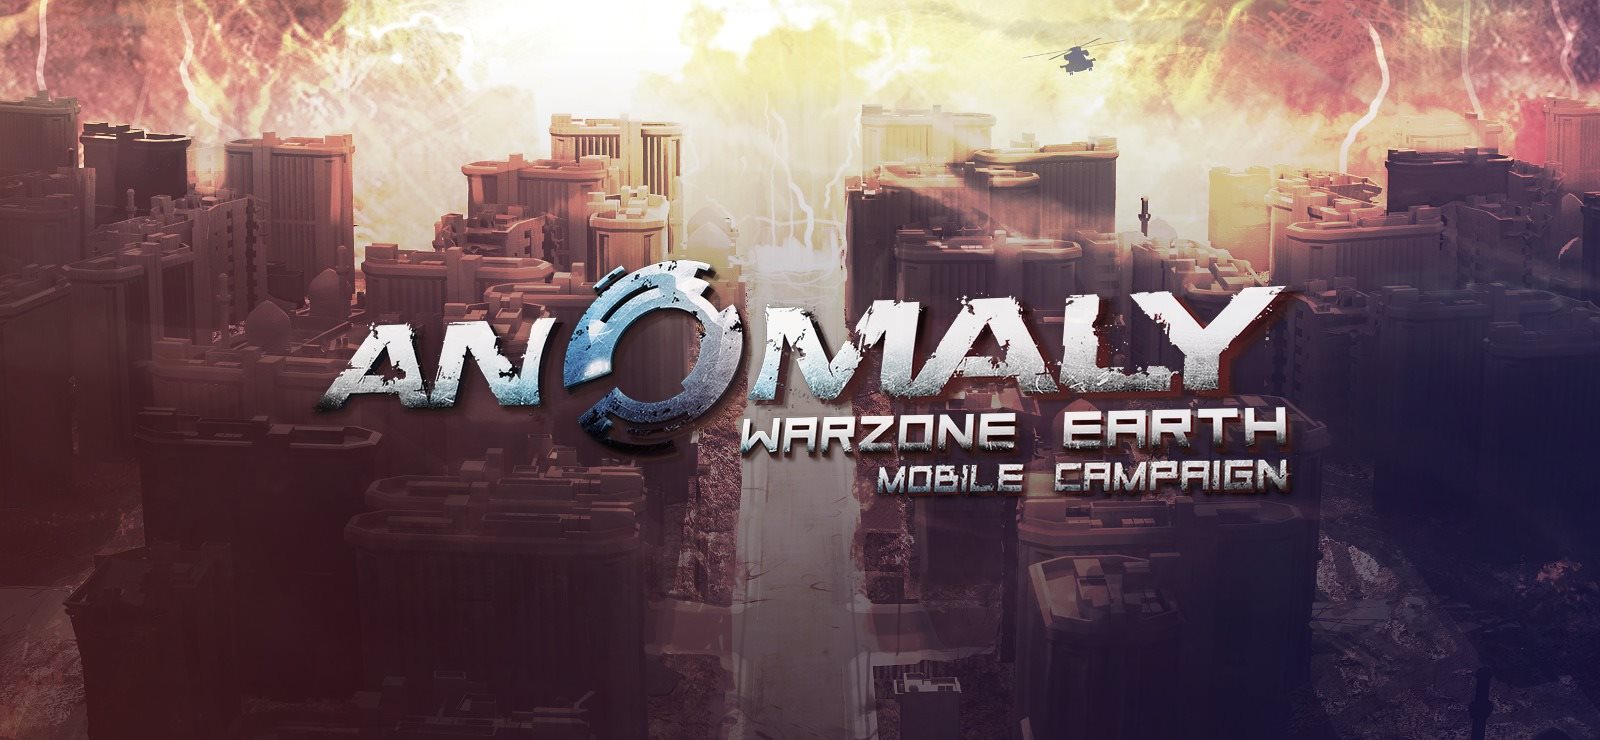 Anomaly Warzone Earth Mobile Campaign - PC DIGITAL